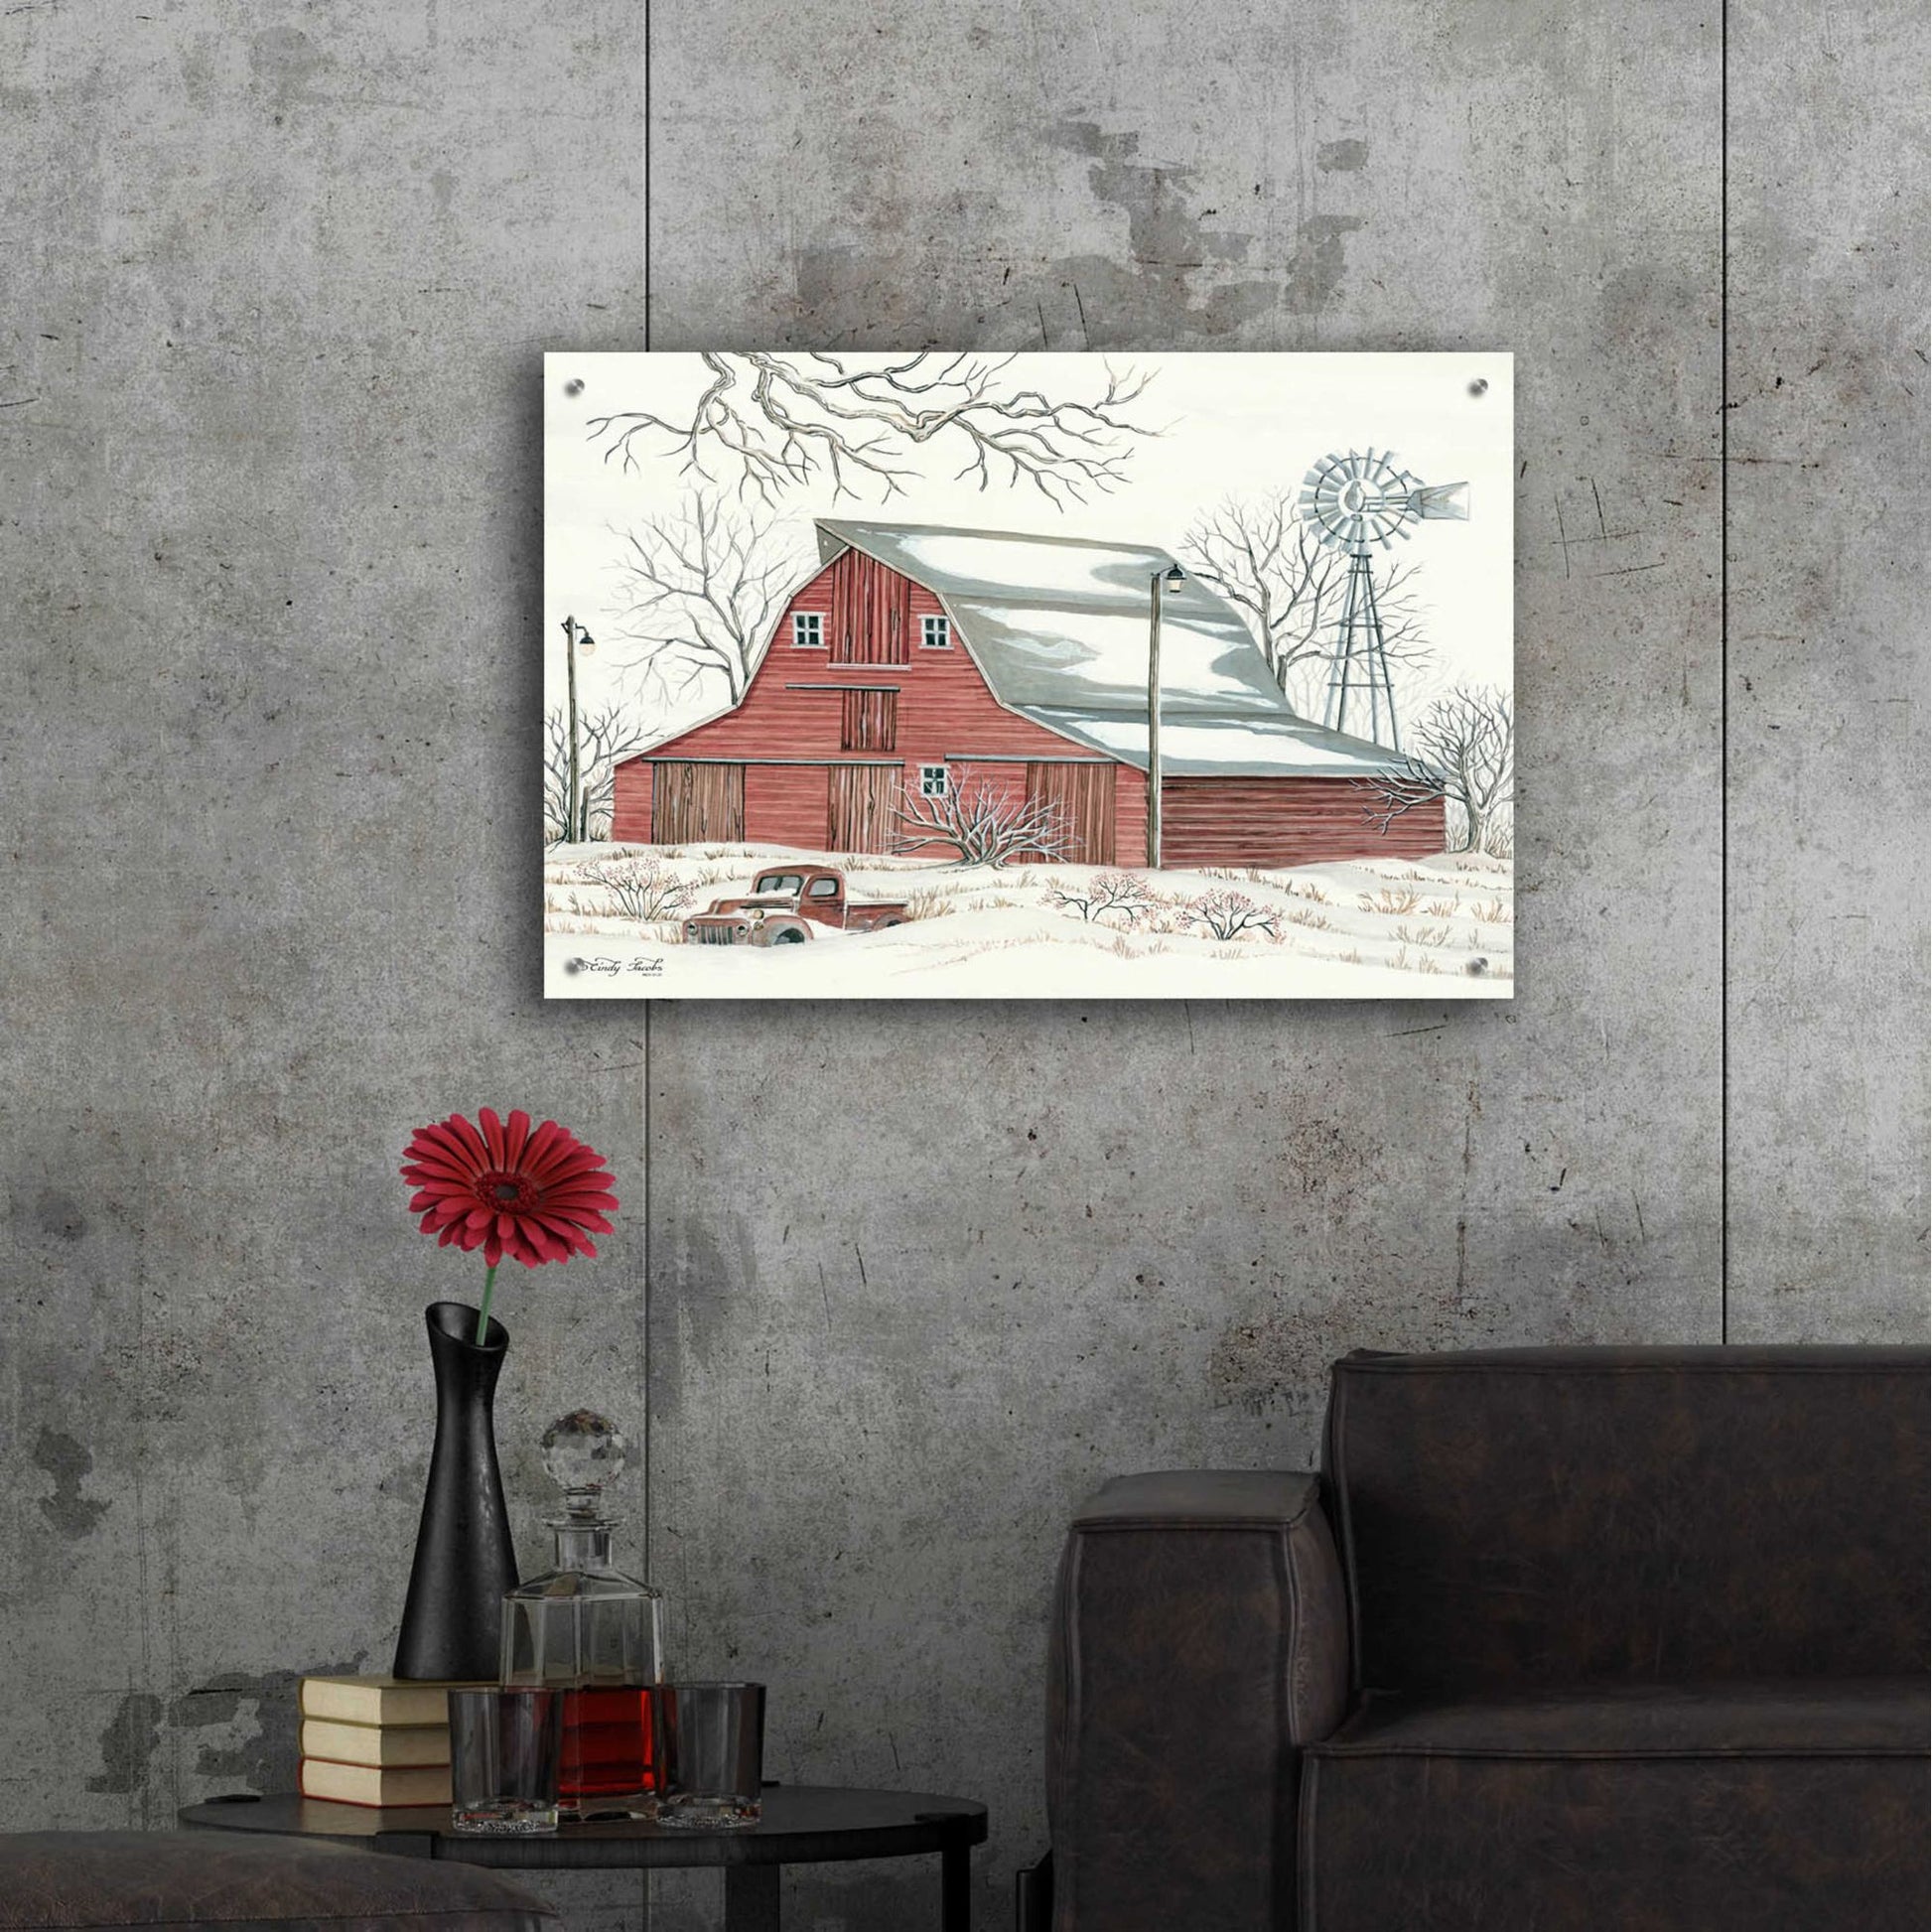 Epic Art 'Winter Barn with Pickup Truck' by Cindy Jacobs, Acrylic Glass Wall Art,36x24